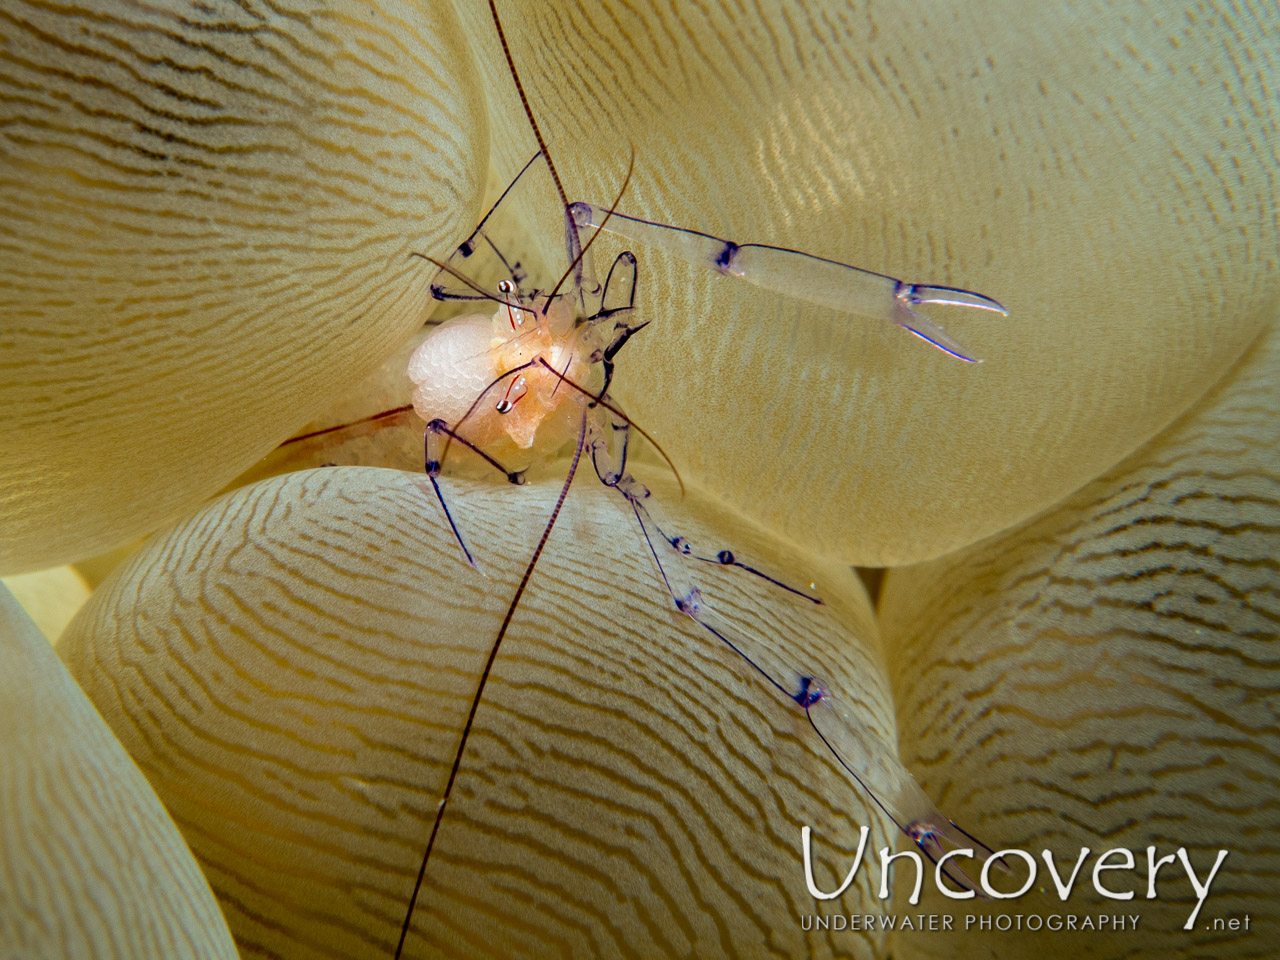 Bubble Coral Shrimp (vir Philippinensis) shot in Indonesia|North Sulawesi|Lembeh Strait|Lembeh Resort House Reef